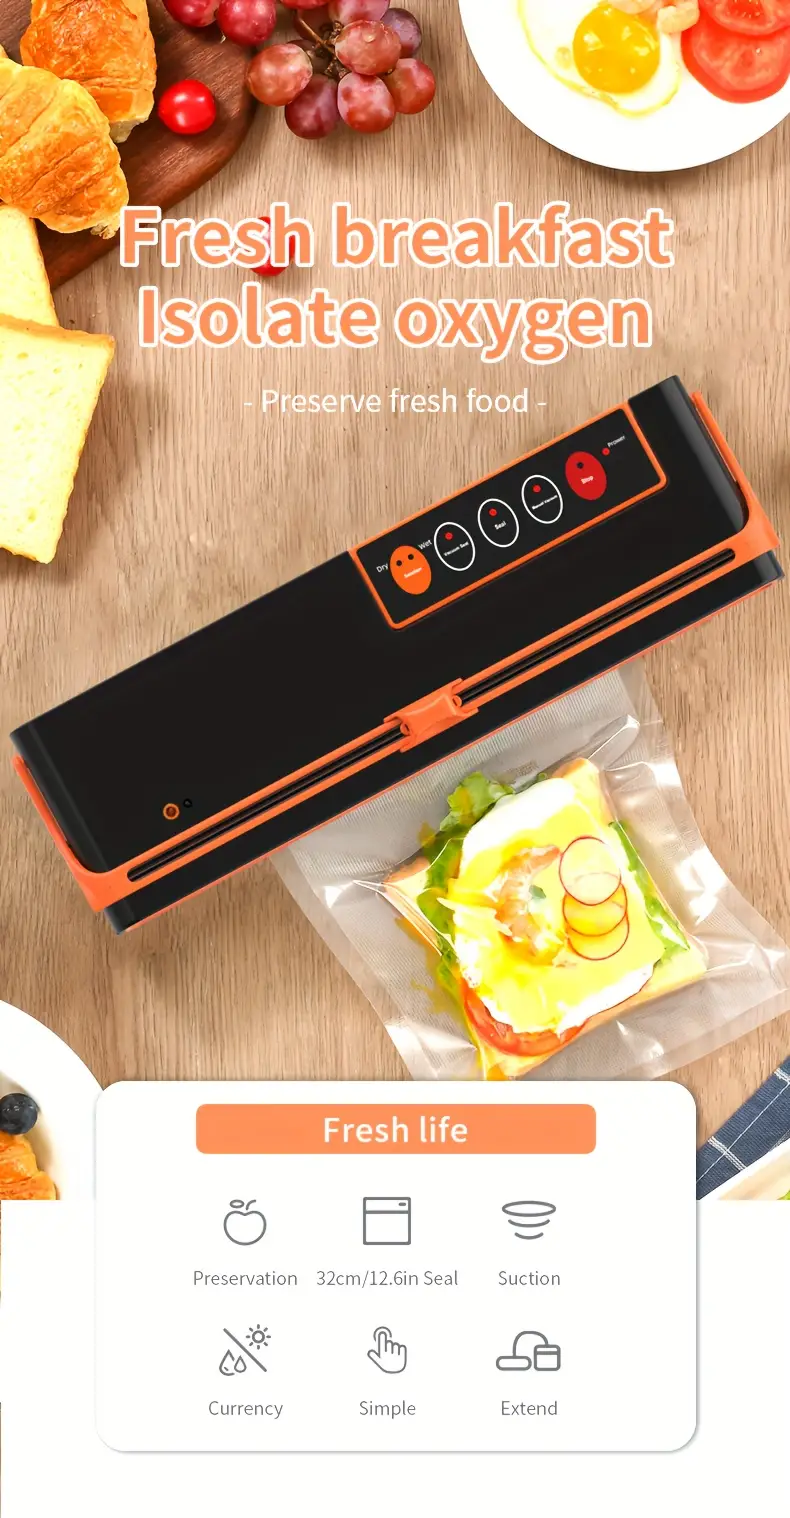 1set vacuum sealer machine automatic food sealer with cutter dry moist modes maximum sealing width 12 6 inch with removable adjustable bag holder powerful suction air sealing system with 10 sealing bags air suction hose details 0